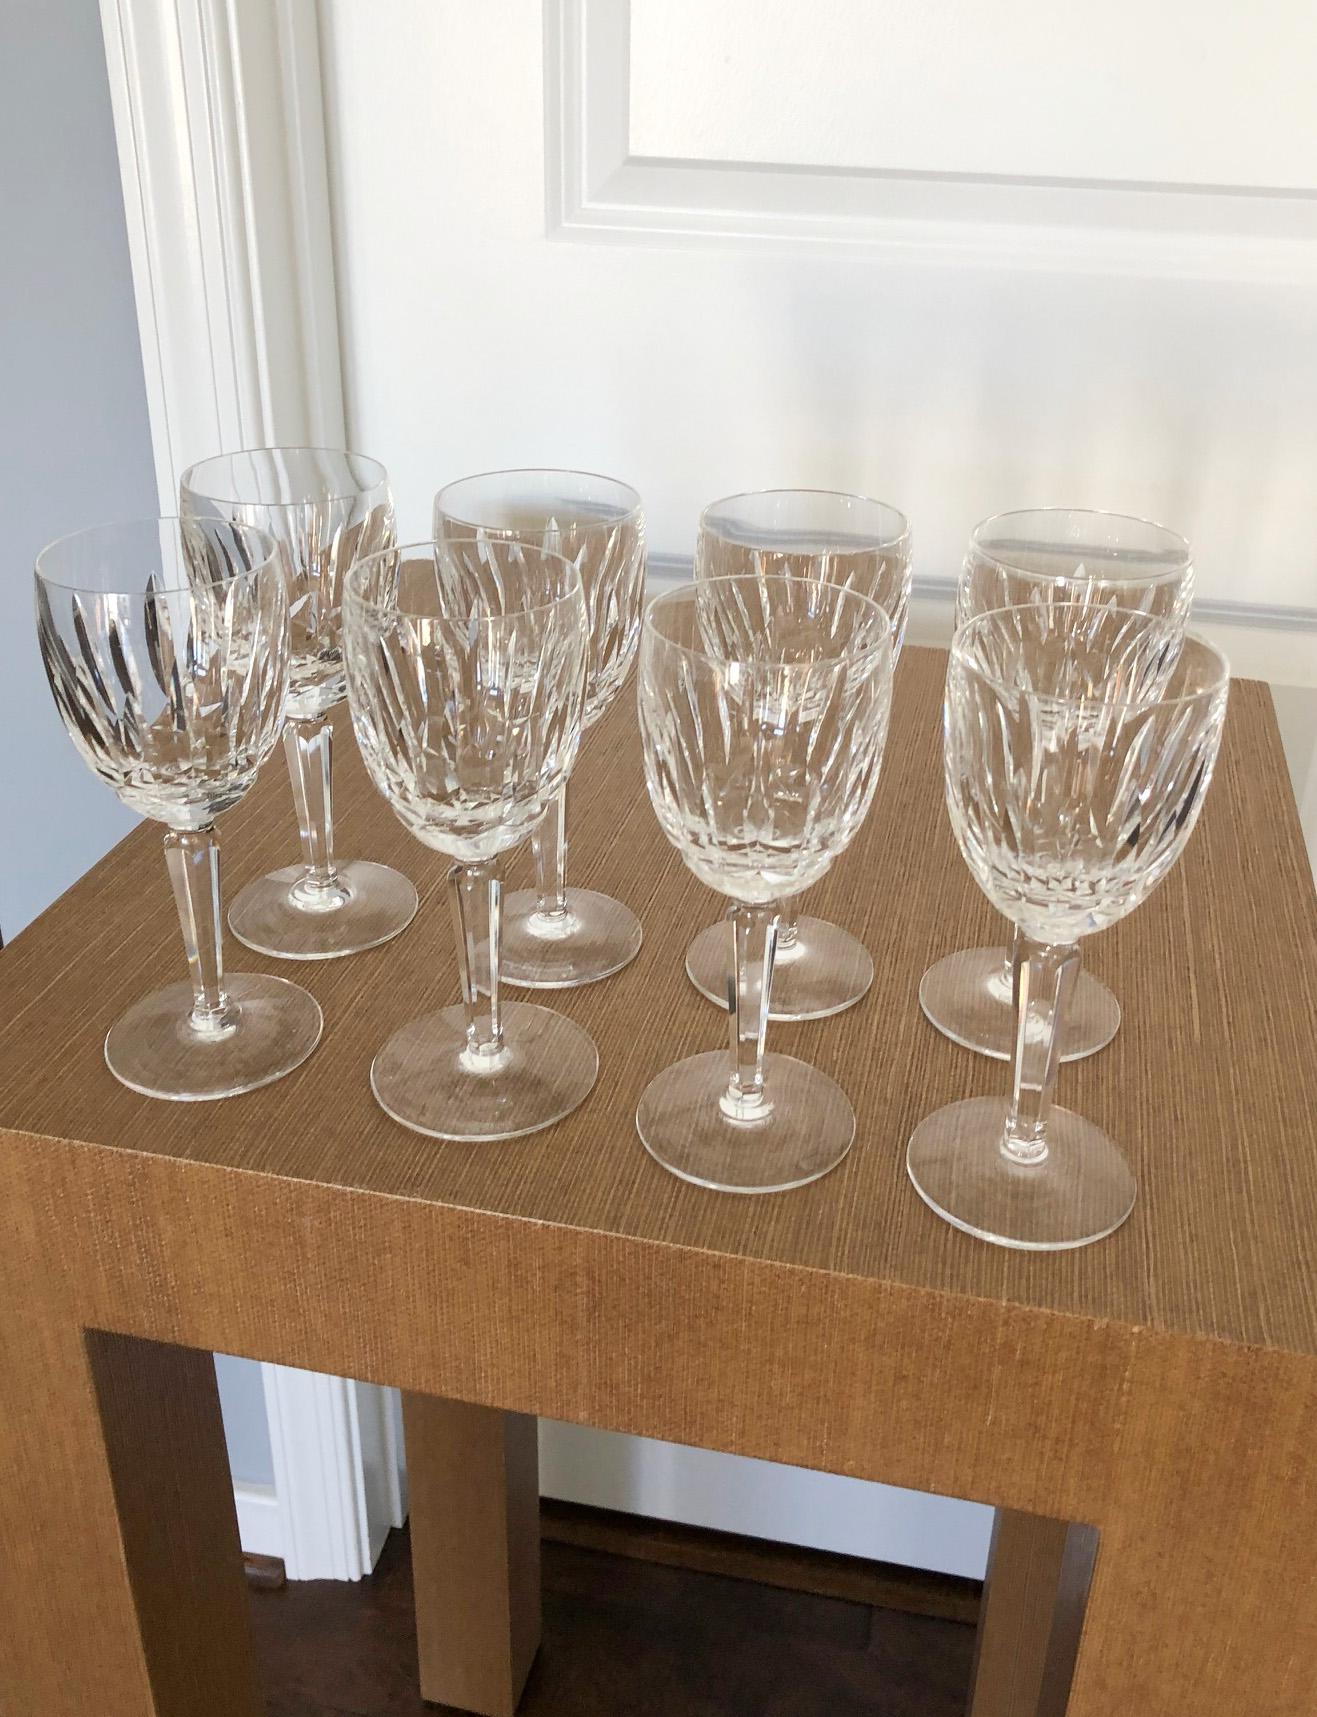 Gorgeous set of Waterford crystal claret wine glasses in the discontinued Kildare pattern. Each, 3